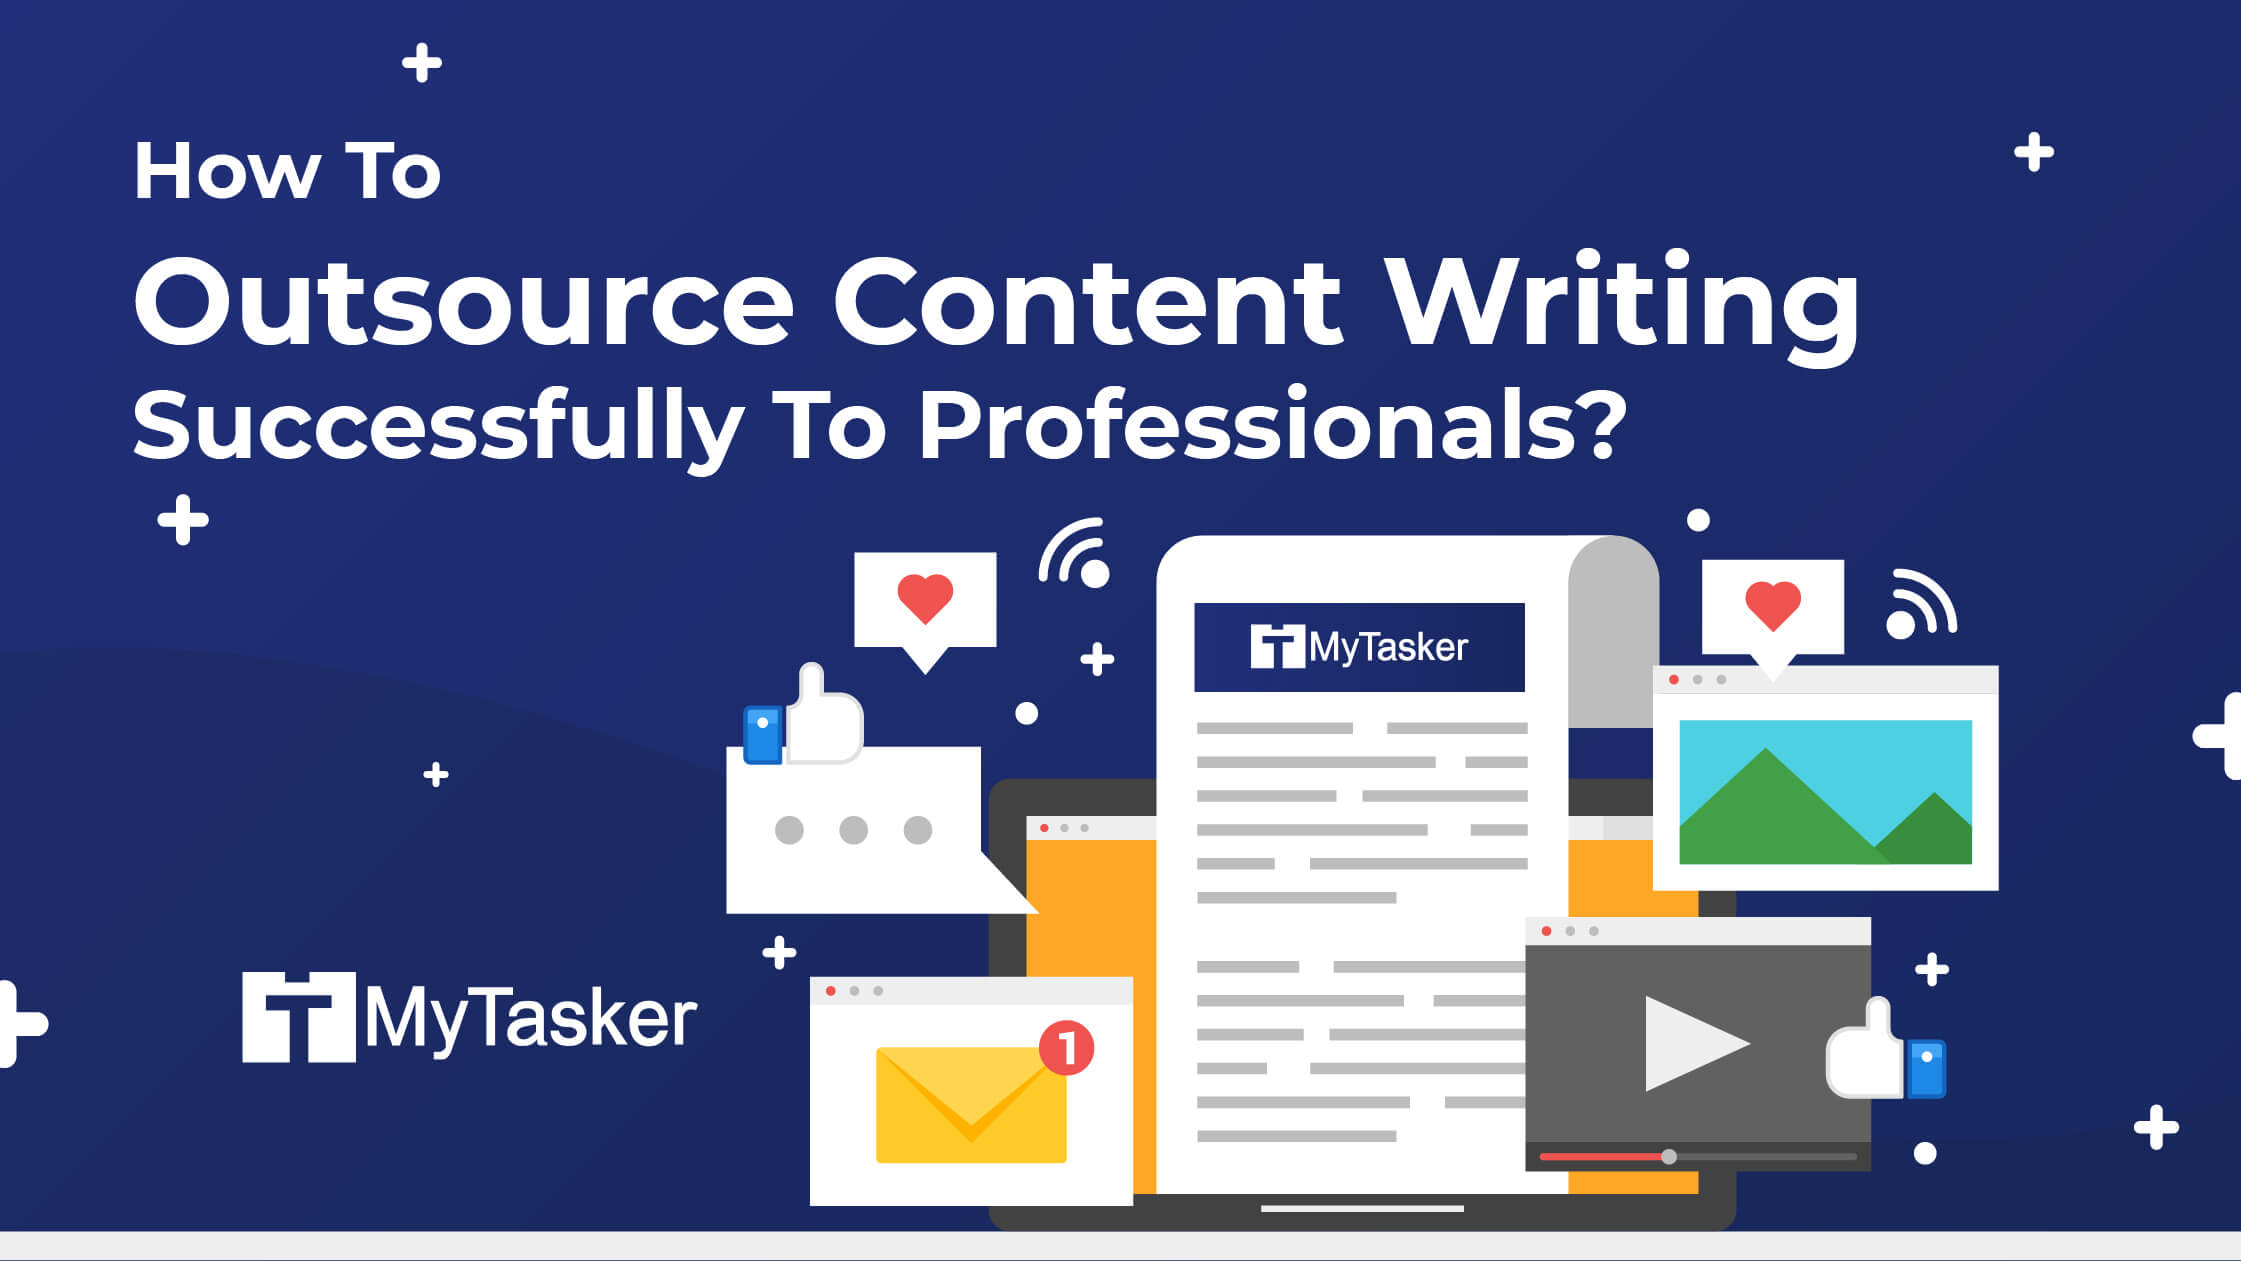 How To Outsource Content Writing Successfully To Professionals